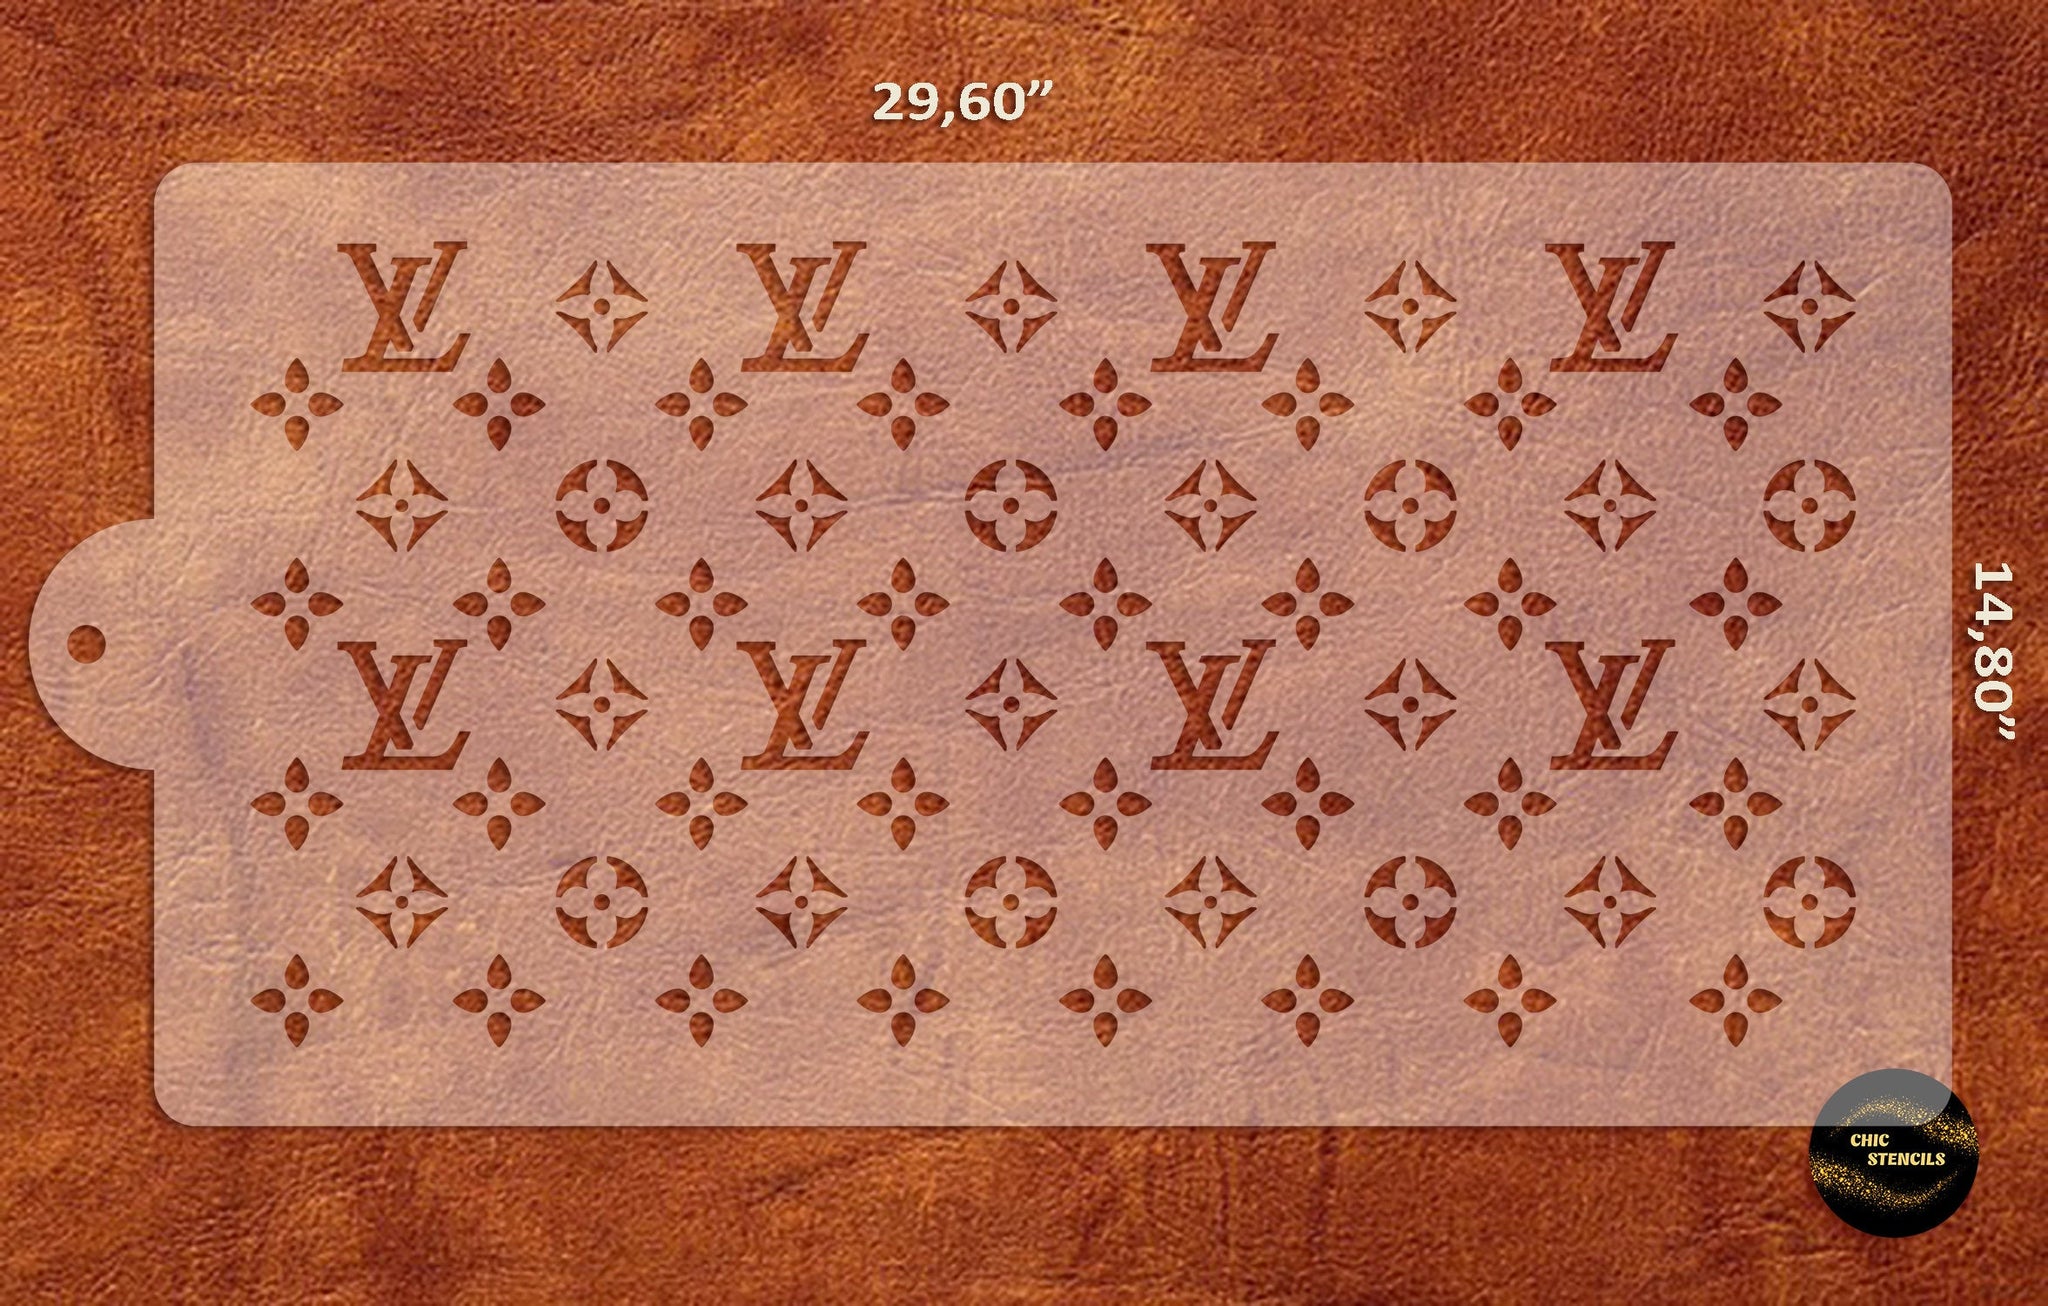 lv stencils for clothing